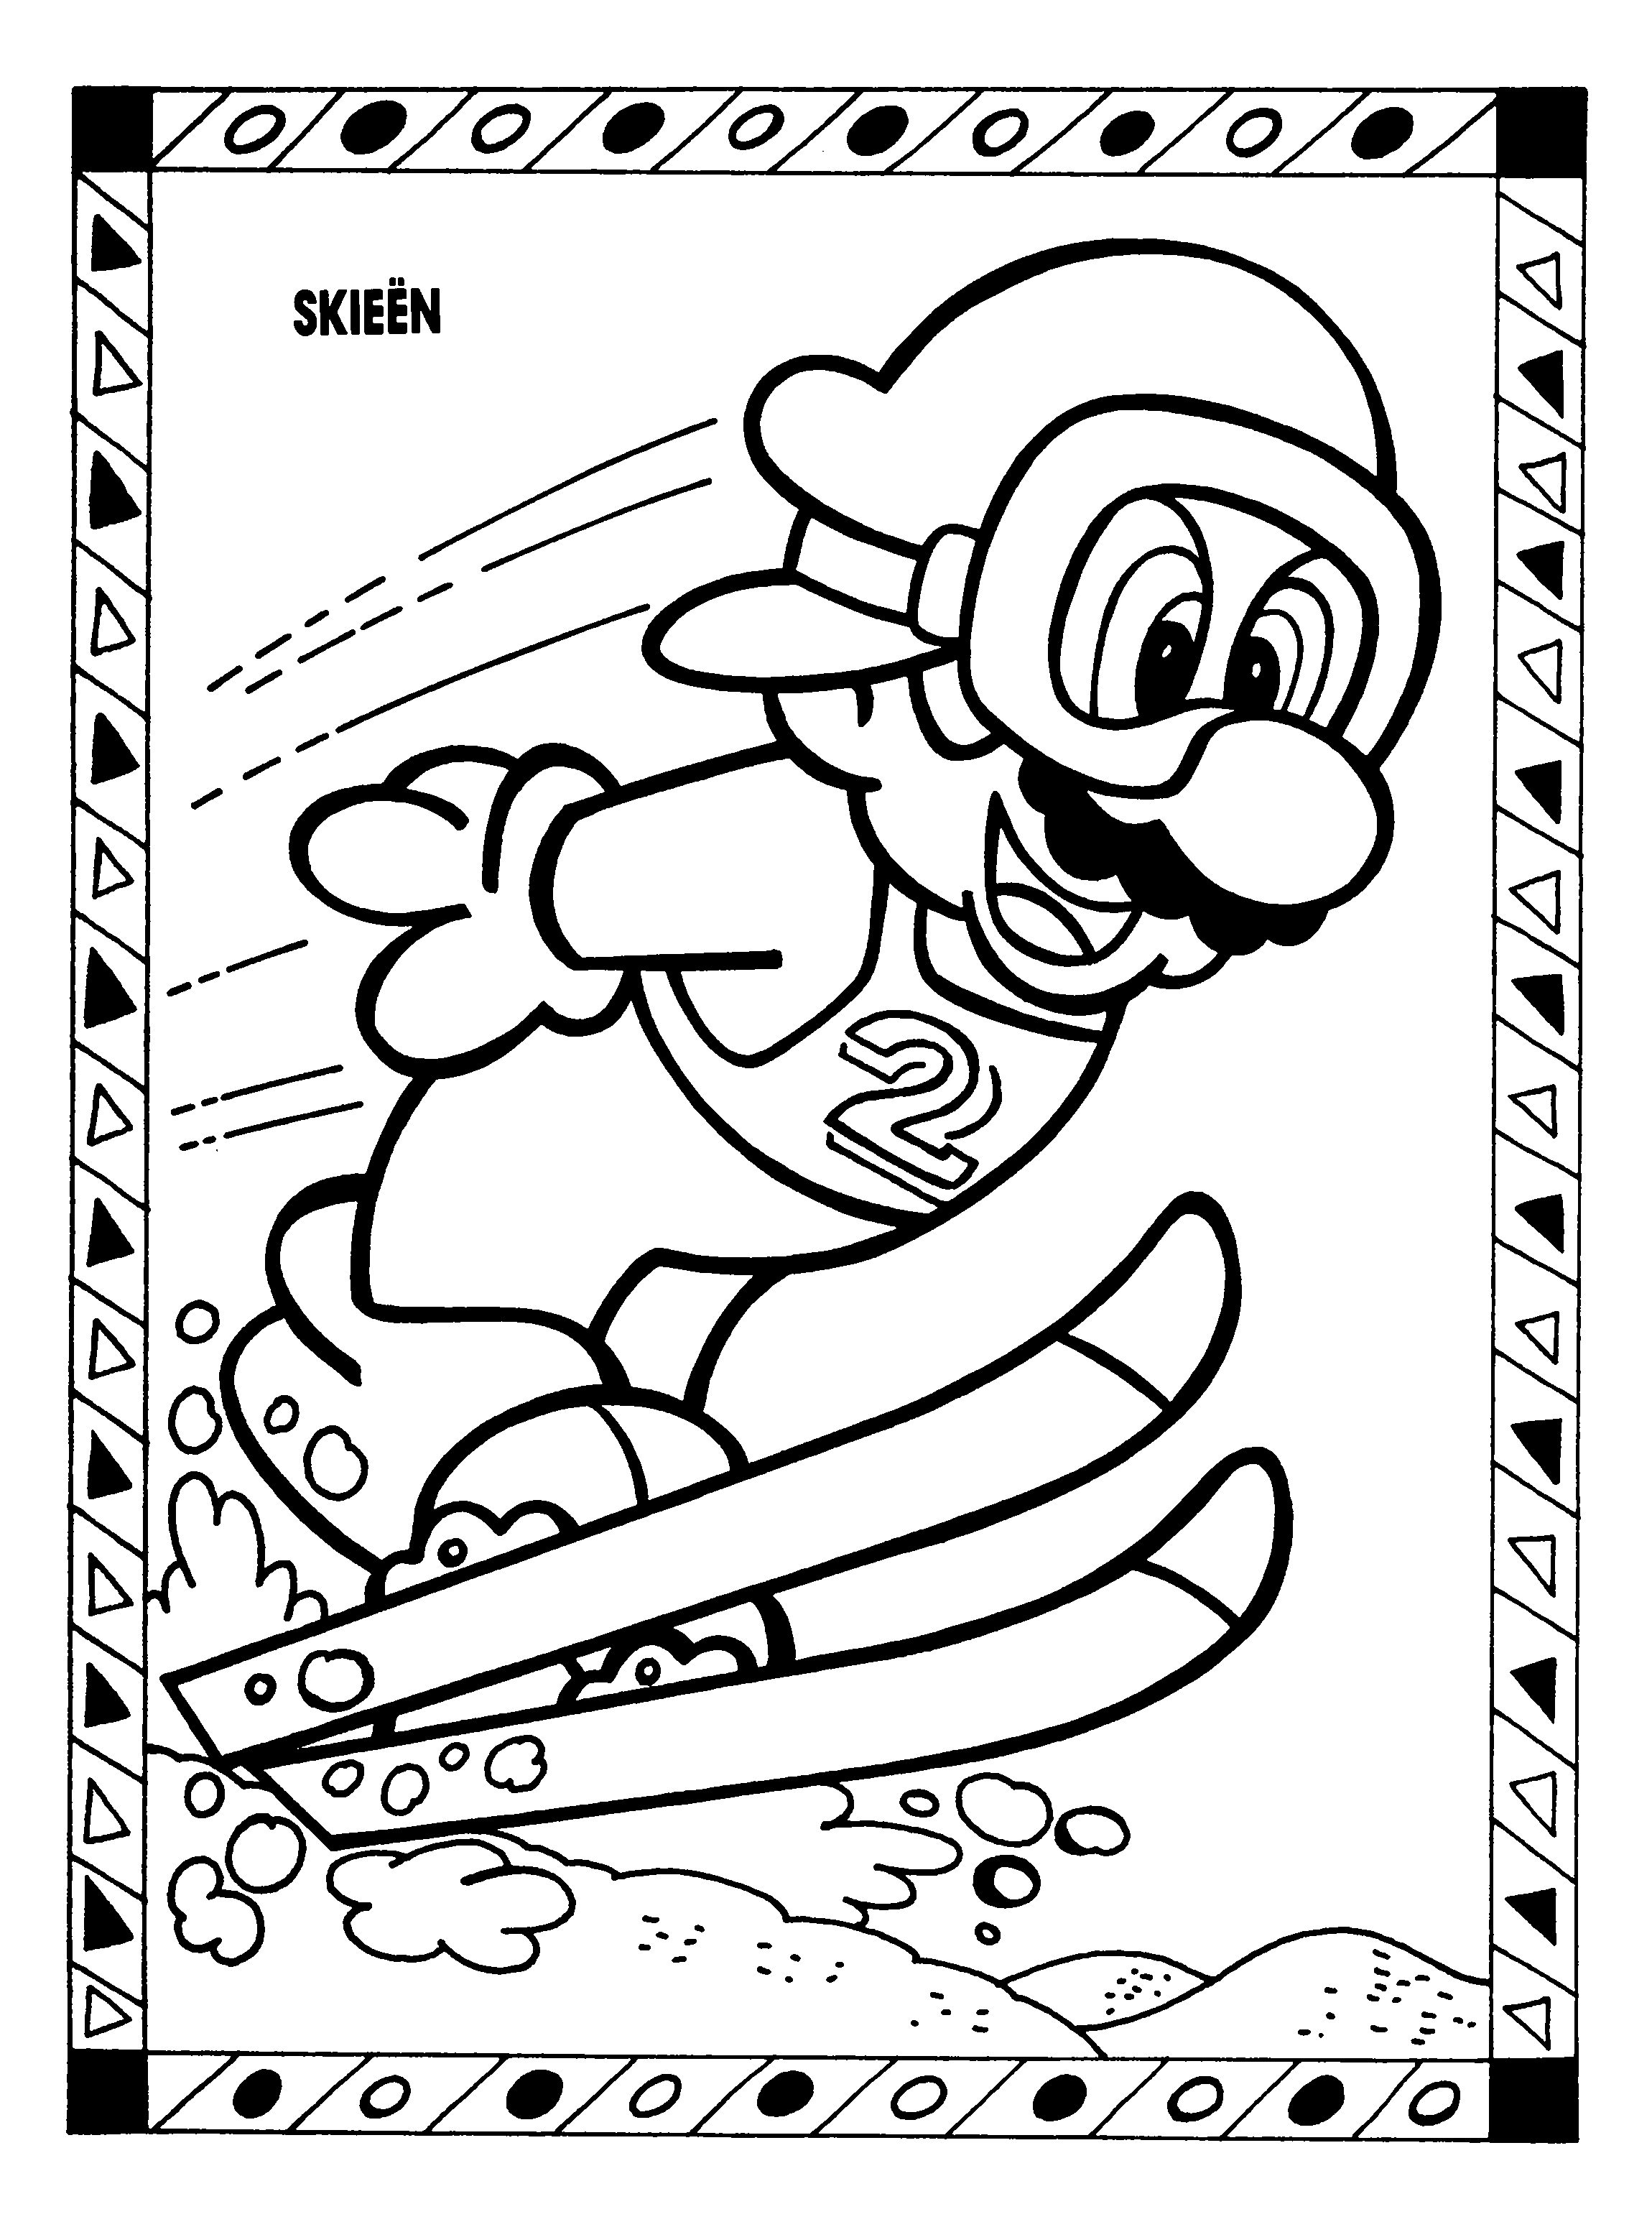 Mario At The Olympic Games coloring page